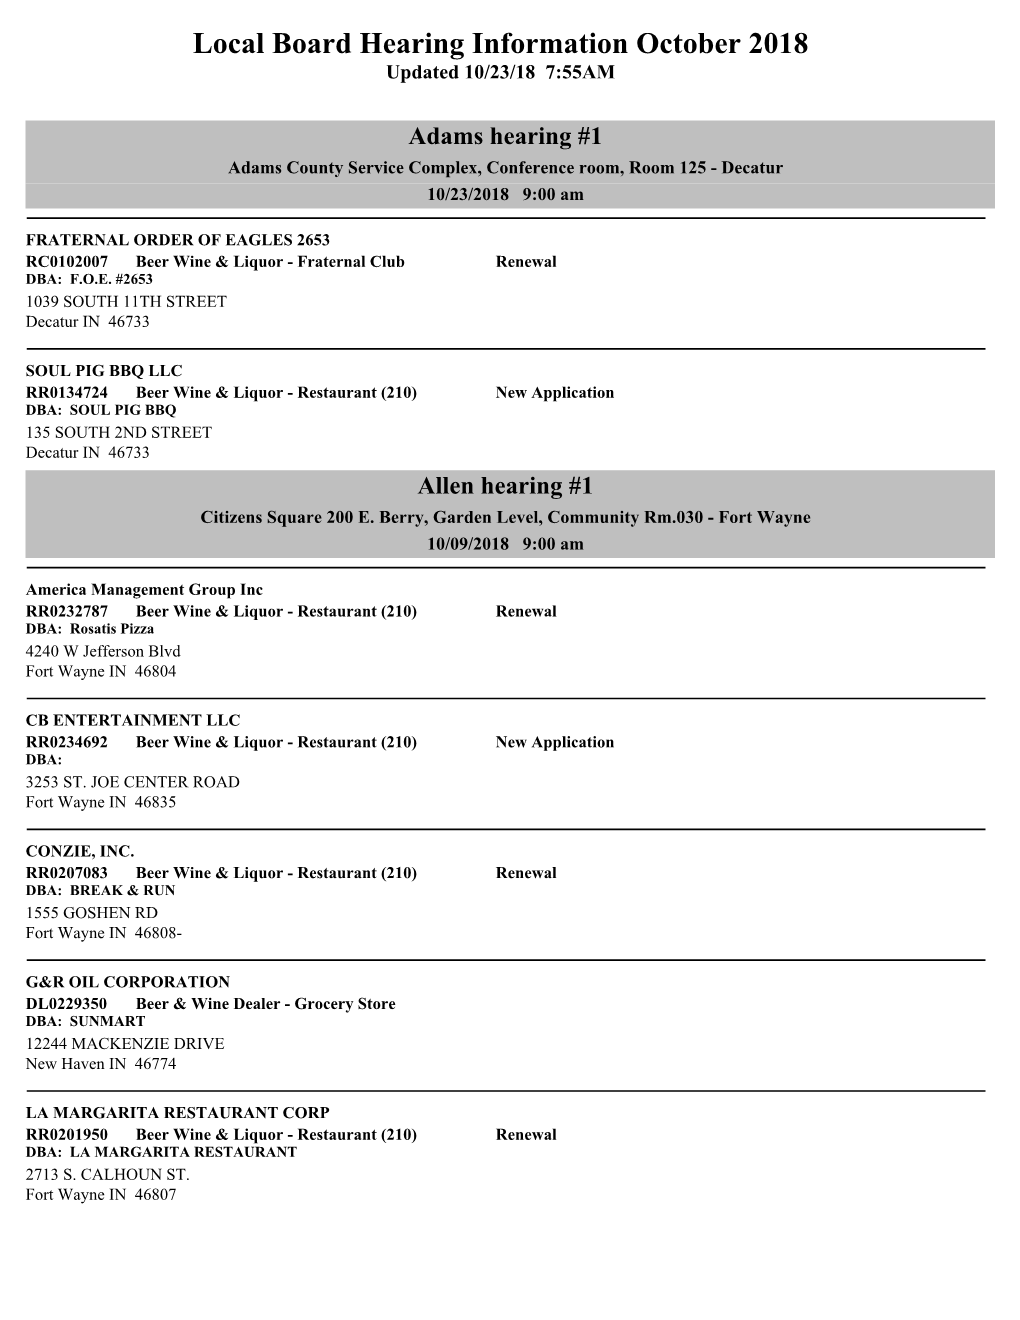 Local Board Hearing Information October 2018 Updated 10/23/18 7:55AM